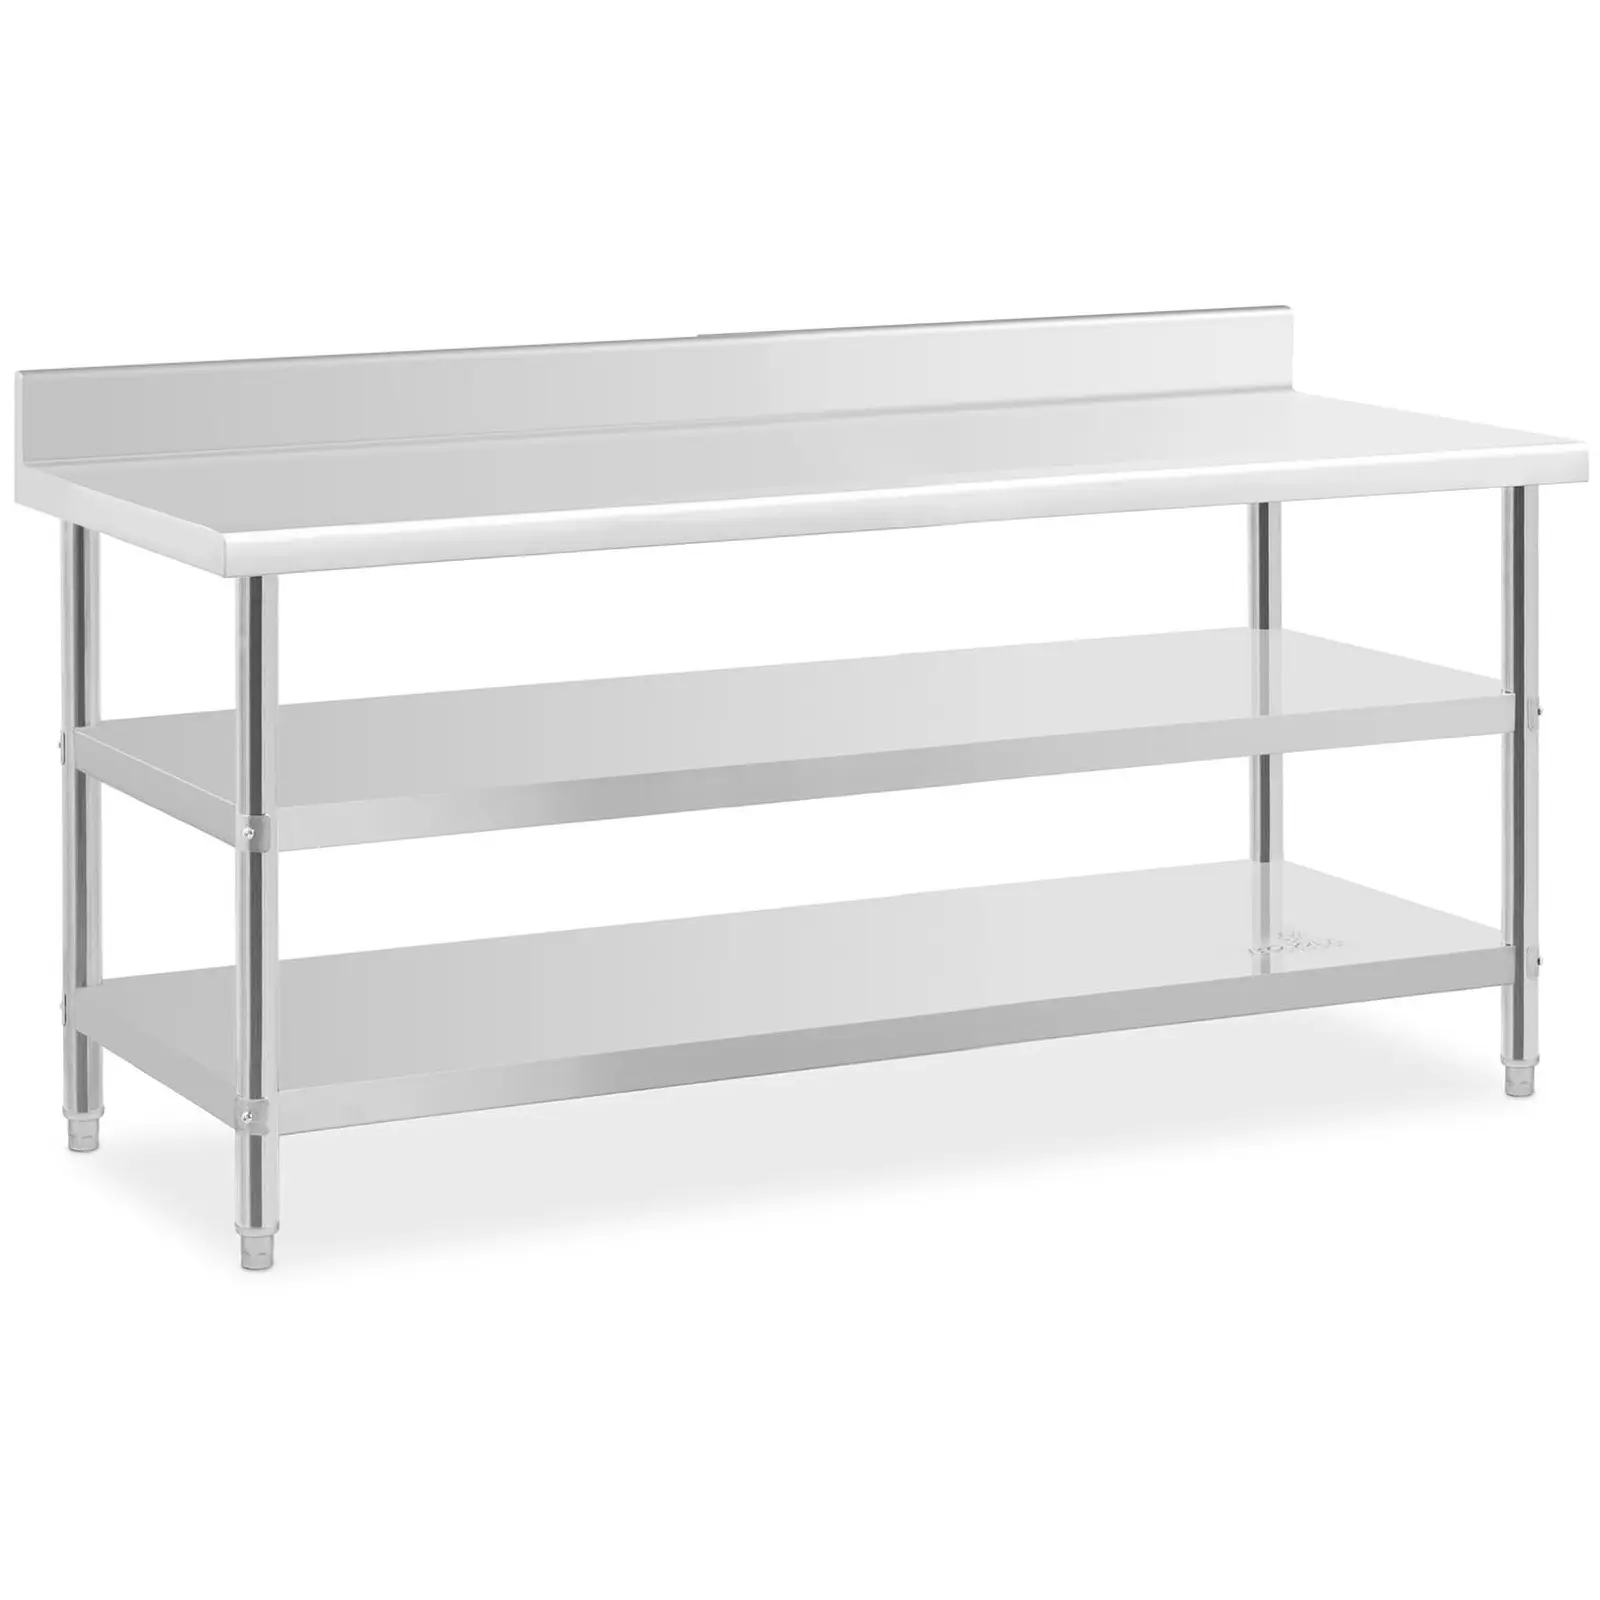 Stainless steel table with backsplash - 180 x 70 x 16.5 cm - 226 kg - 2 shelves - Royal Catering